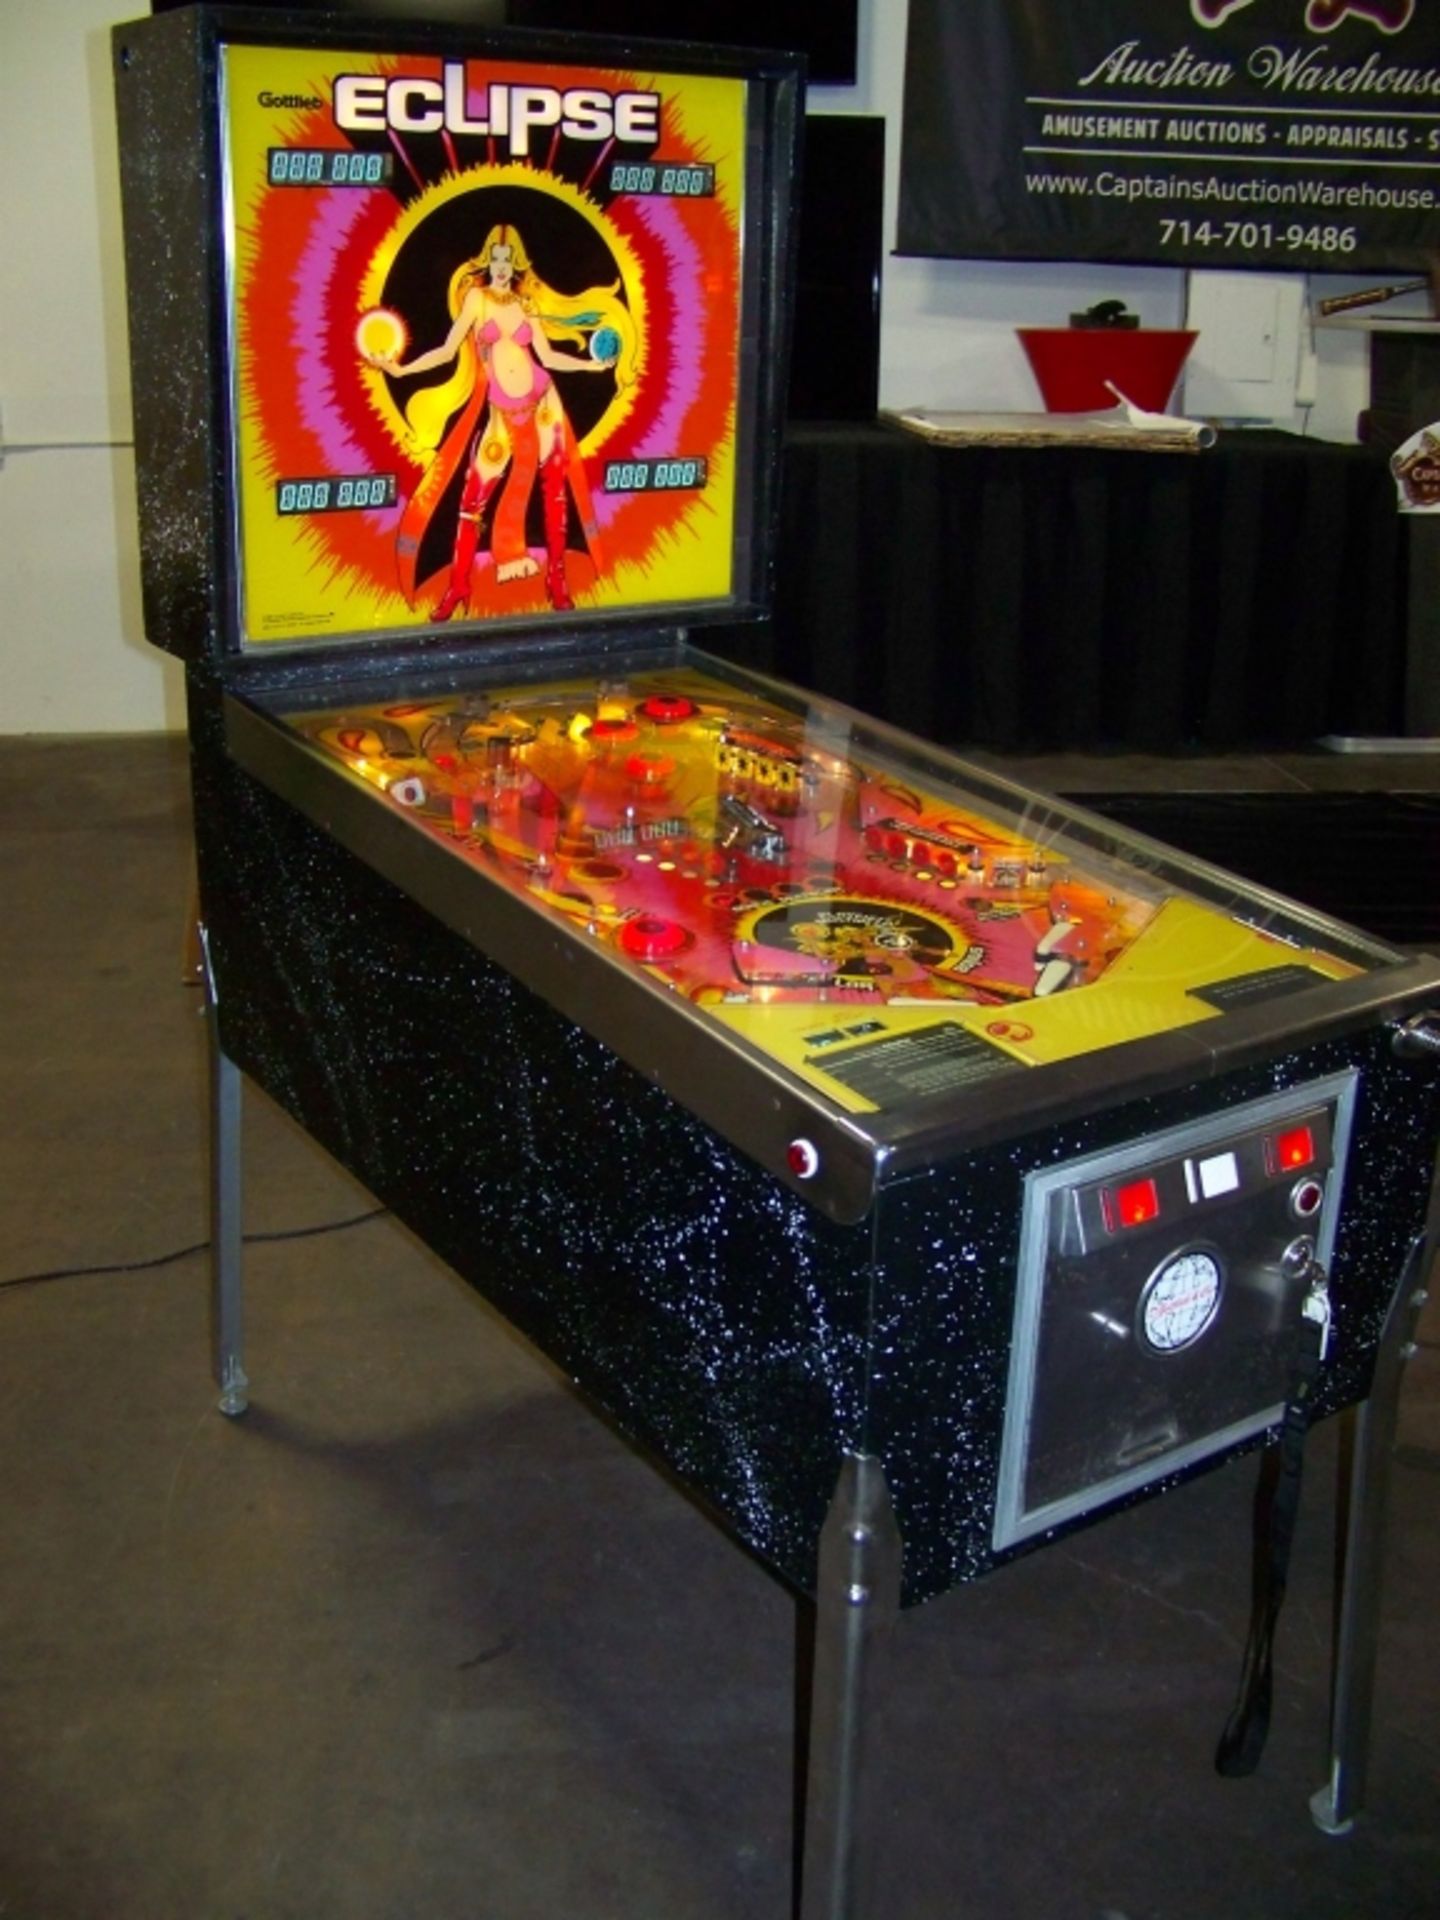 ECLIPSE PINBALL MACHINE RARE GOTTLIEB TITLE 1982 Item is in used condition. Evidence of wear and